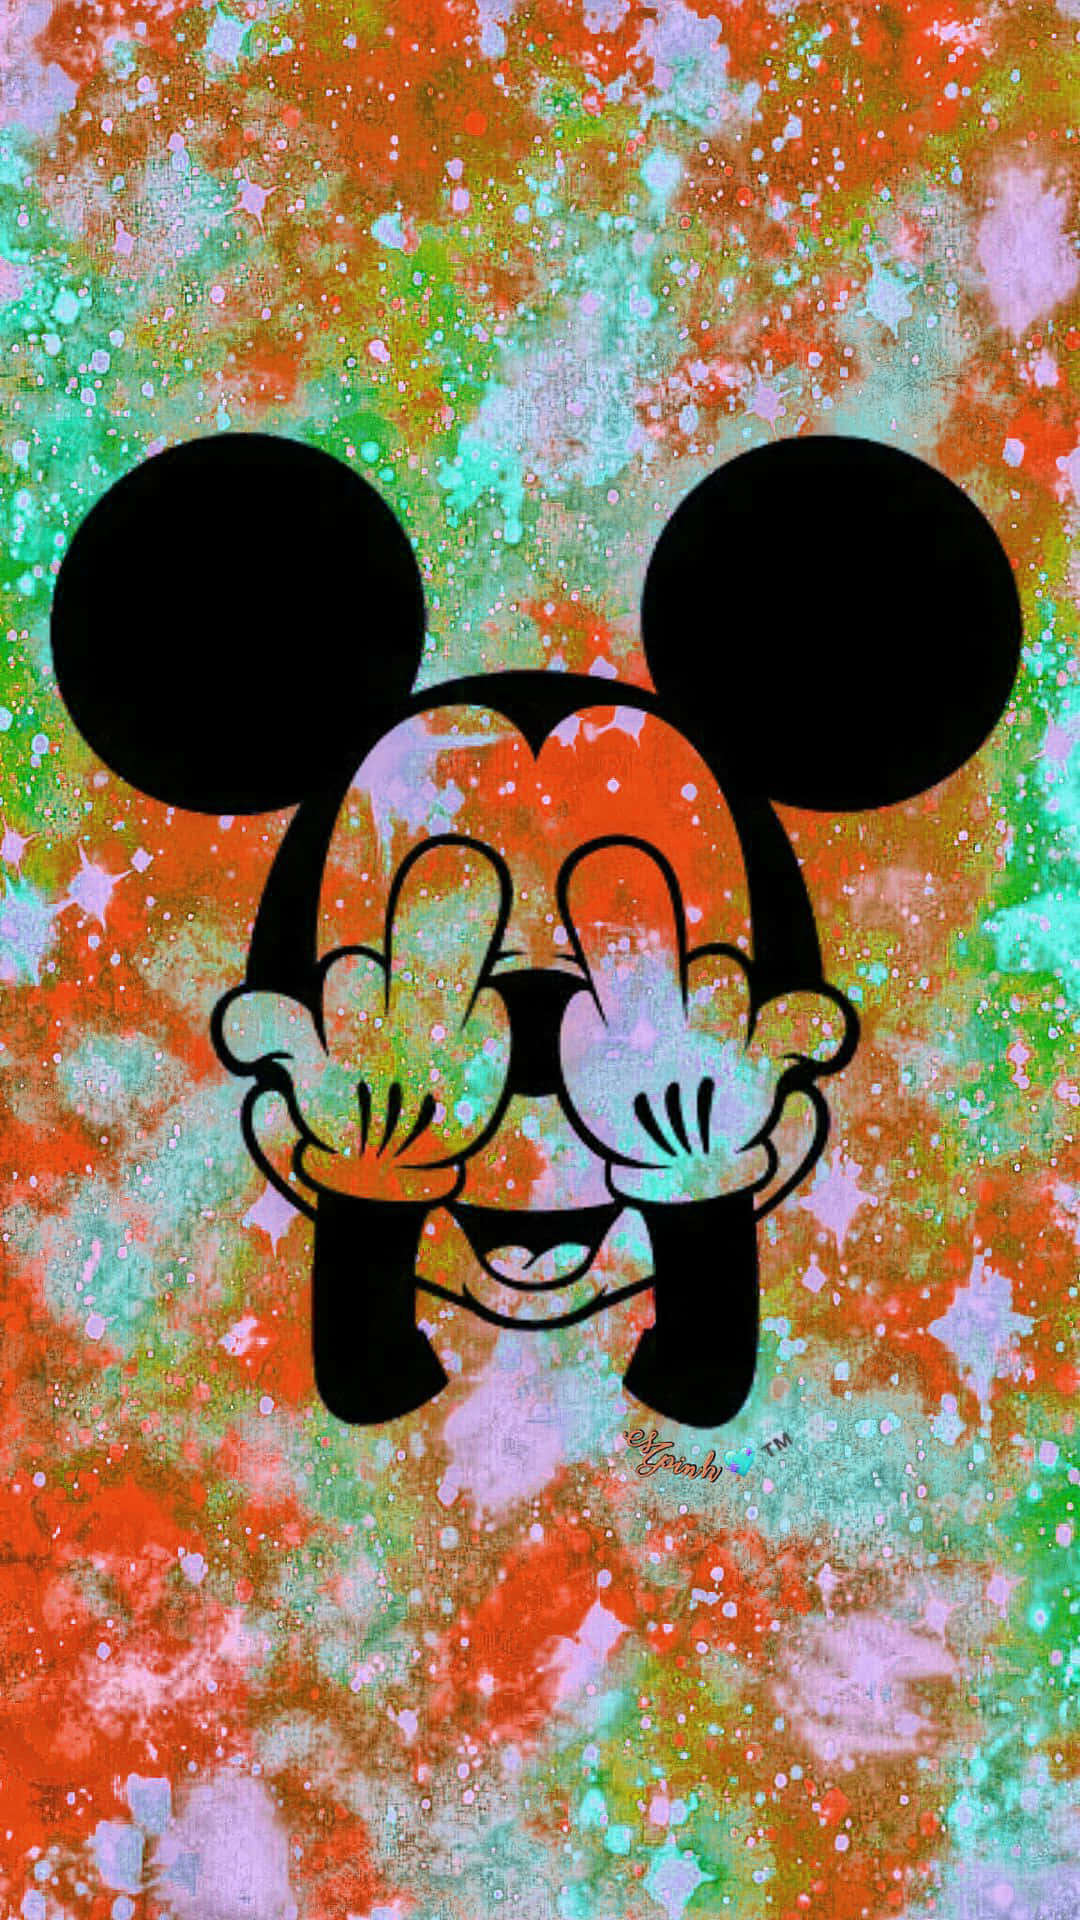 Kig cool, Mickey Mouse! Wallpaper